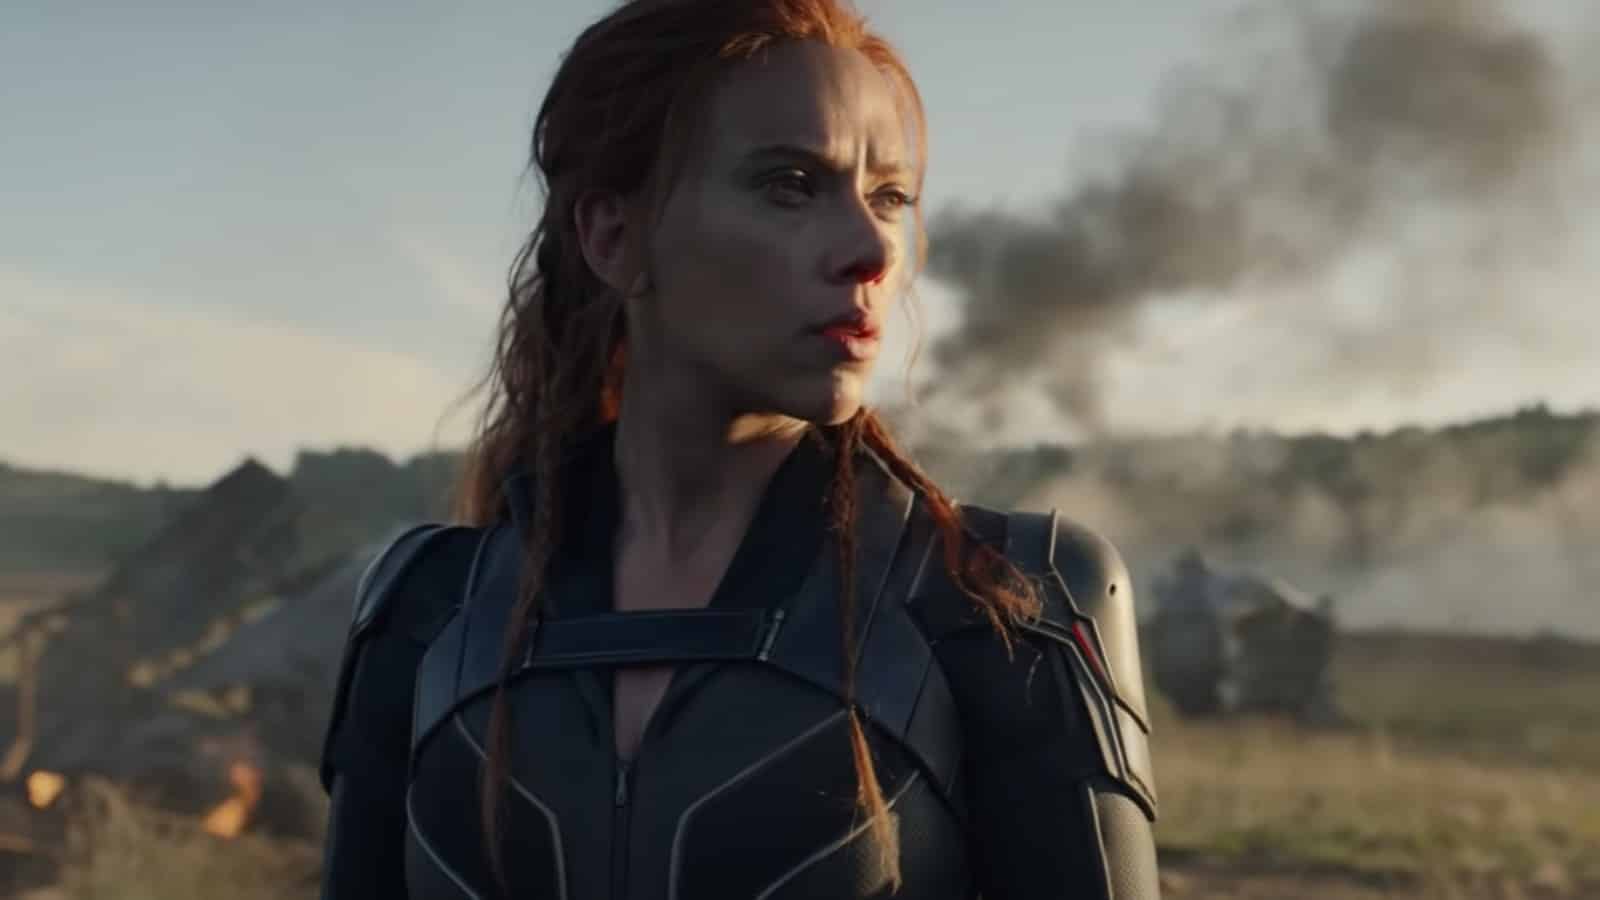 Black Widow actor Scarlett Johansson has responded to rumors that she will return as the hero in a future MCU project, claiming that it would take a “Marvel miracle” to see the return of Natasha Romanoff.